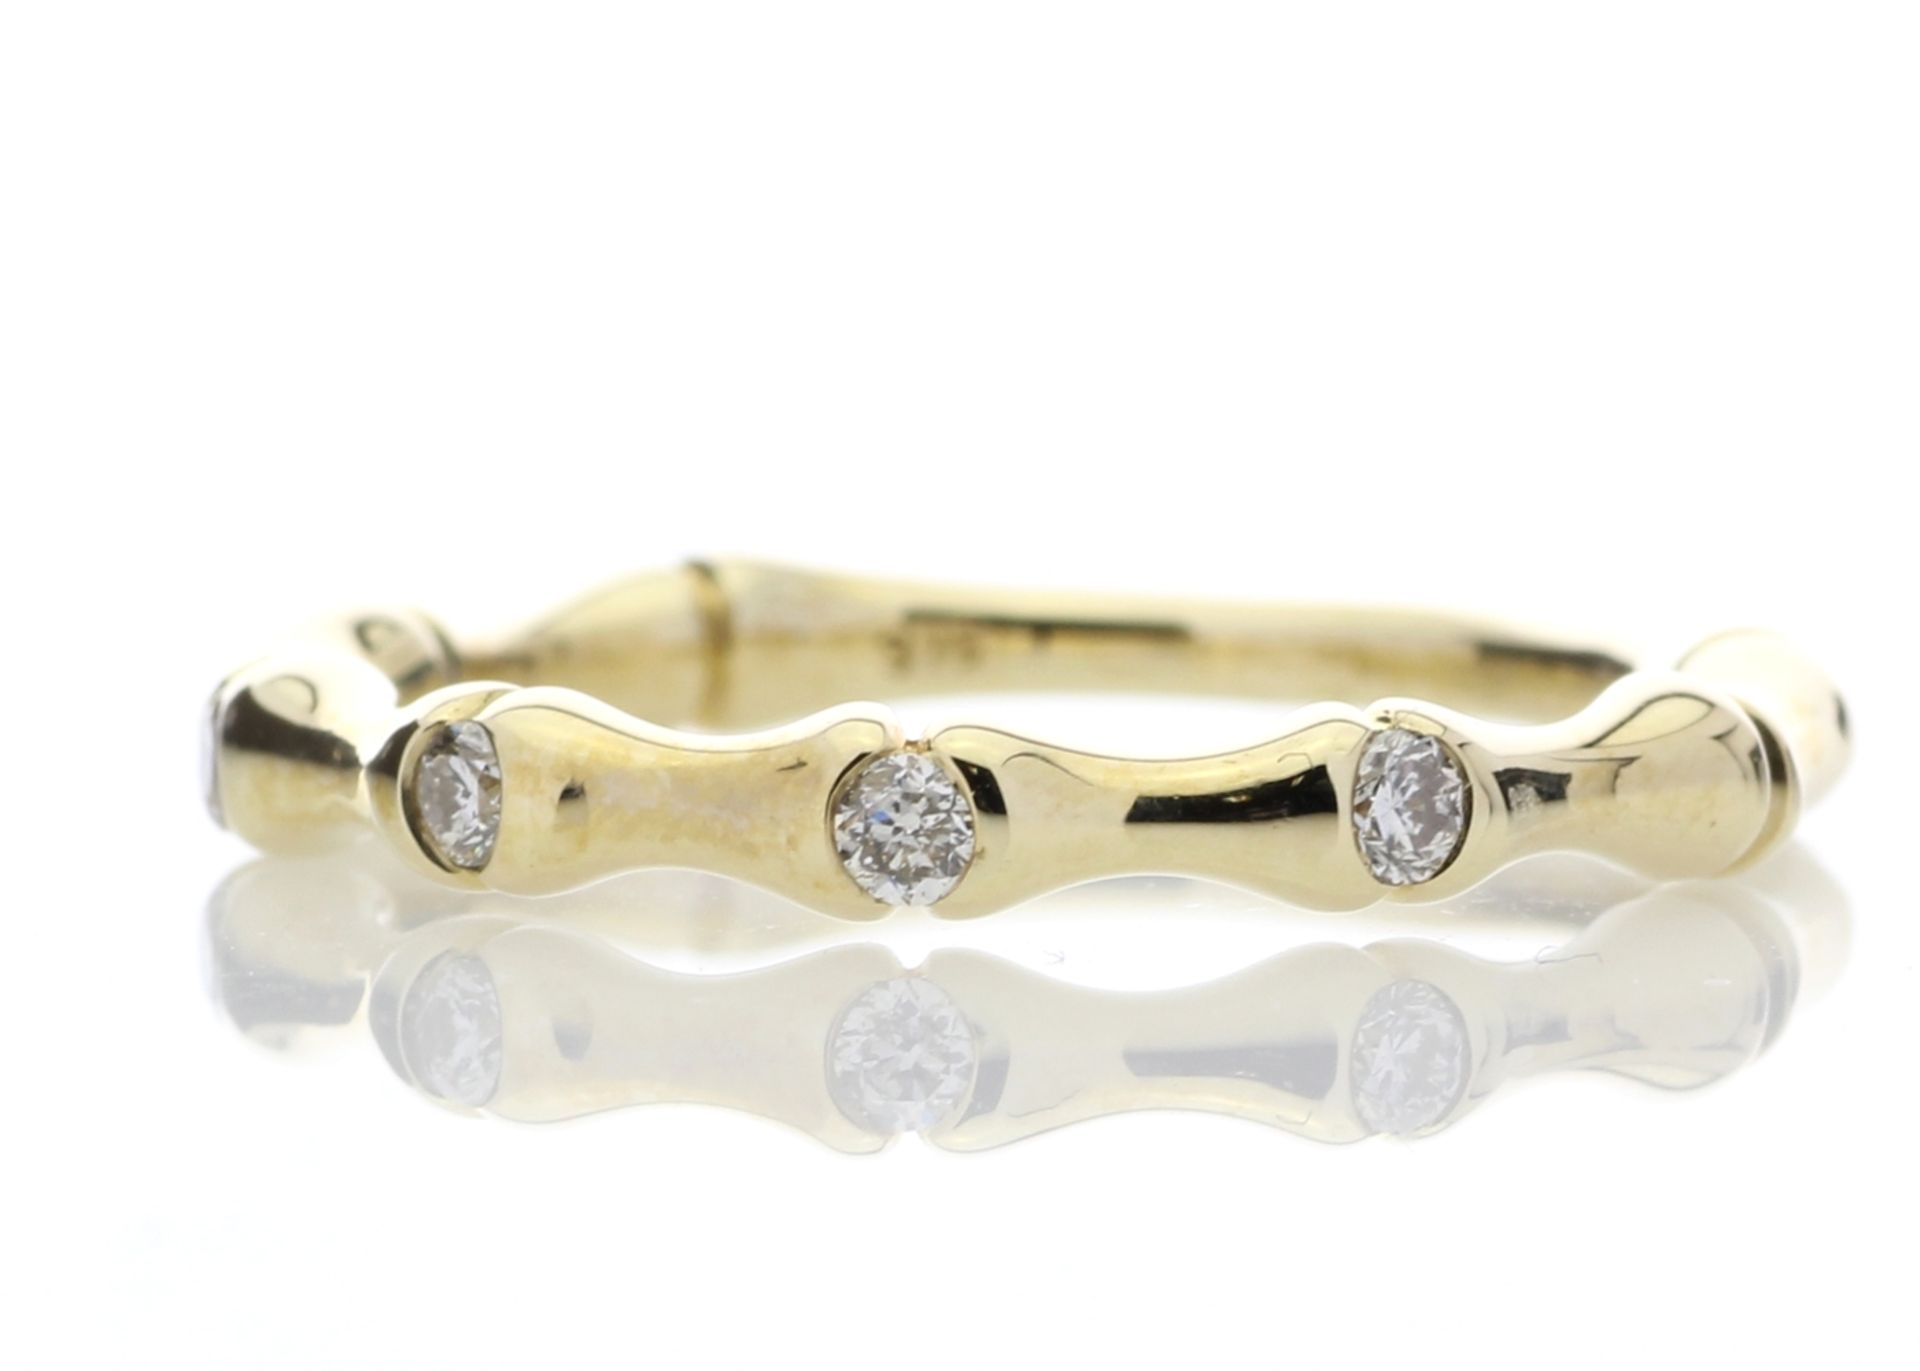 9ct Yellow Gold Diamond Ring 0.12 Carats - Valued by GIE £1,920.00 - 9ct Yellow Gold Diamond Ring - Image 2 of 5